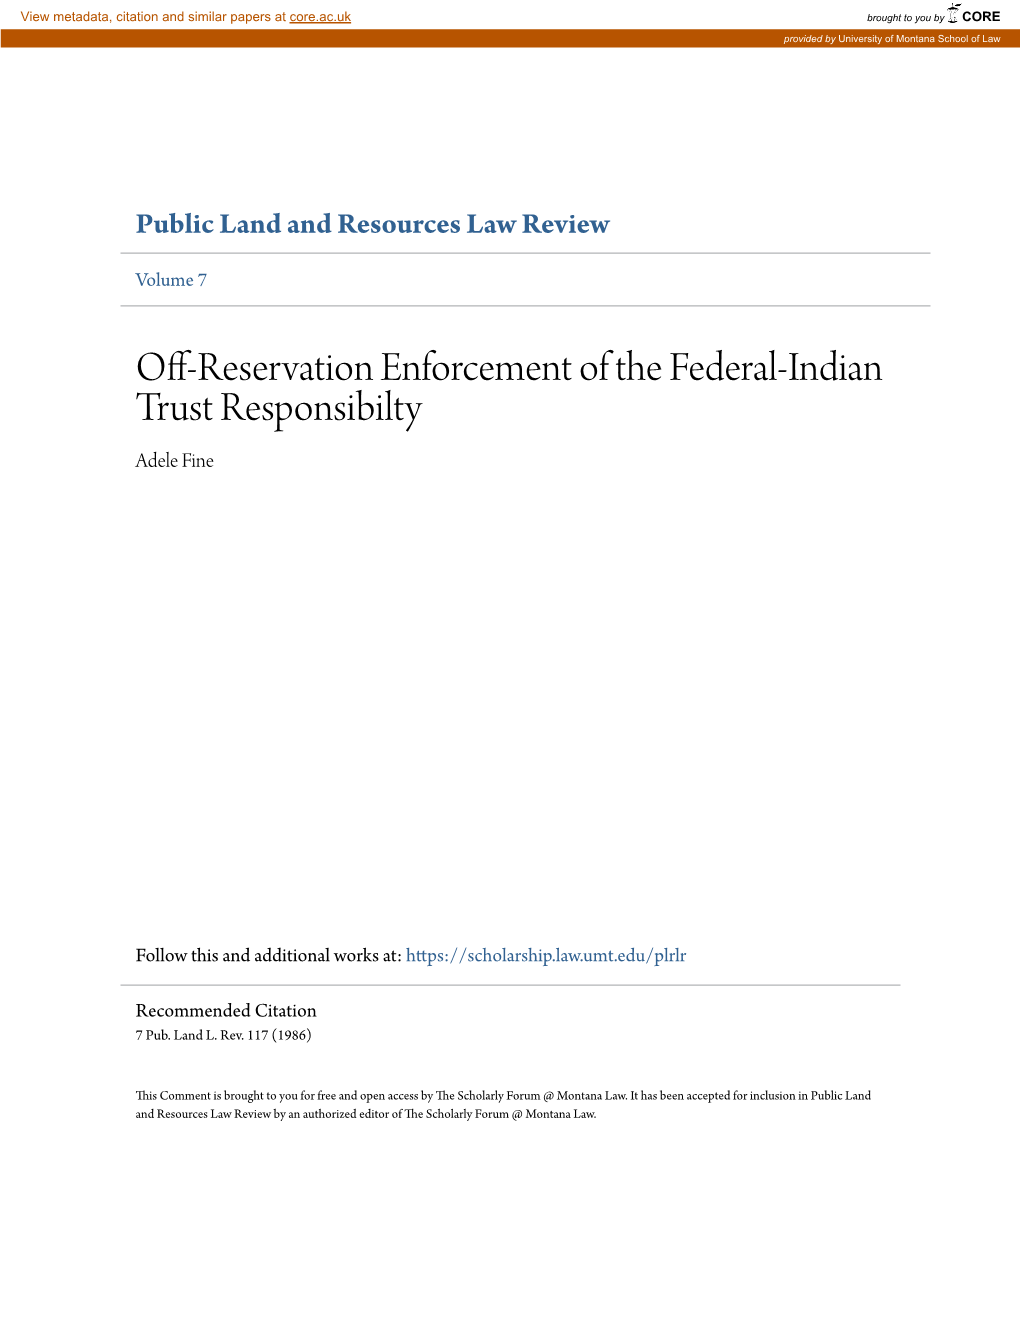 Off-Reservation Enforcement of the Federal-Indian Trust Responsibilty Adele Fine